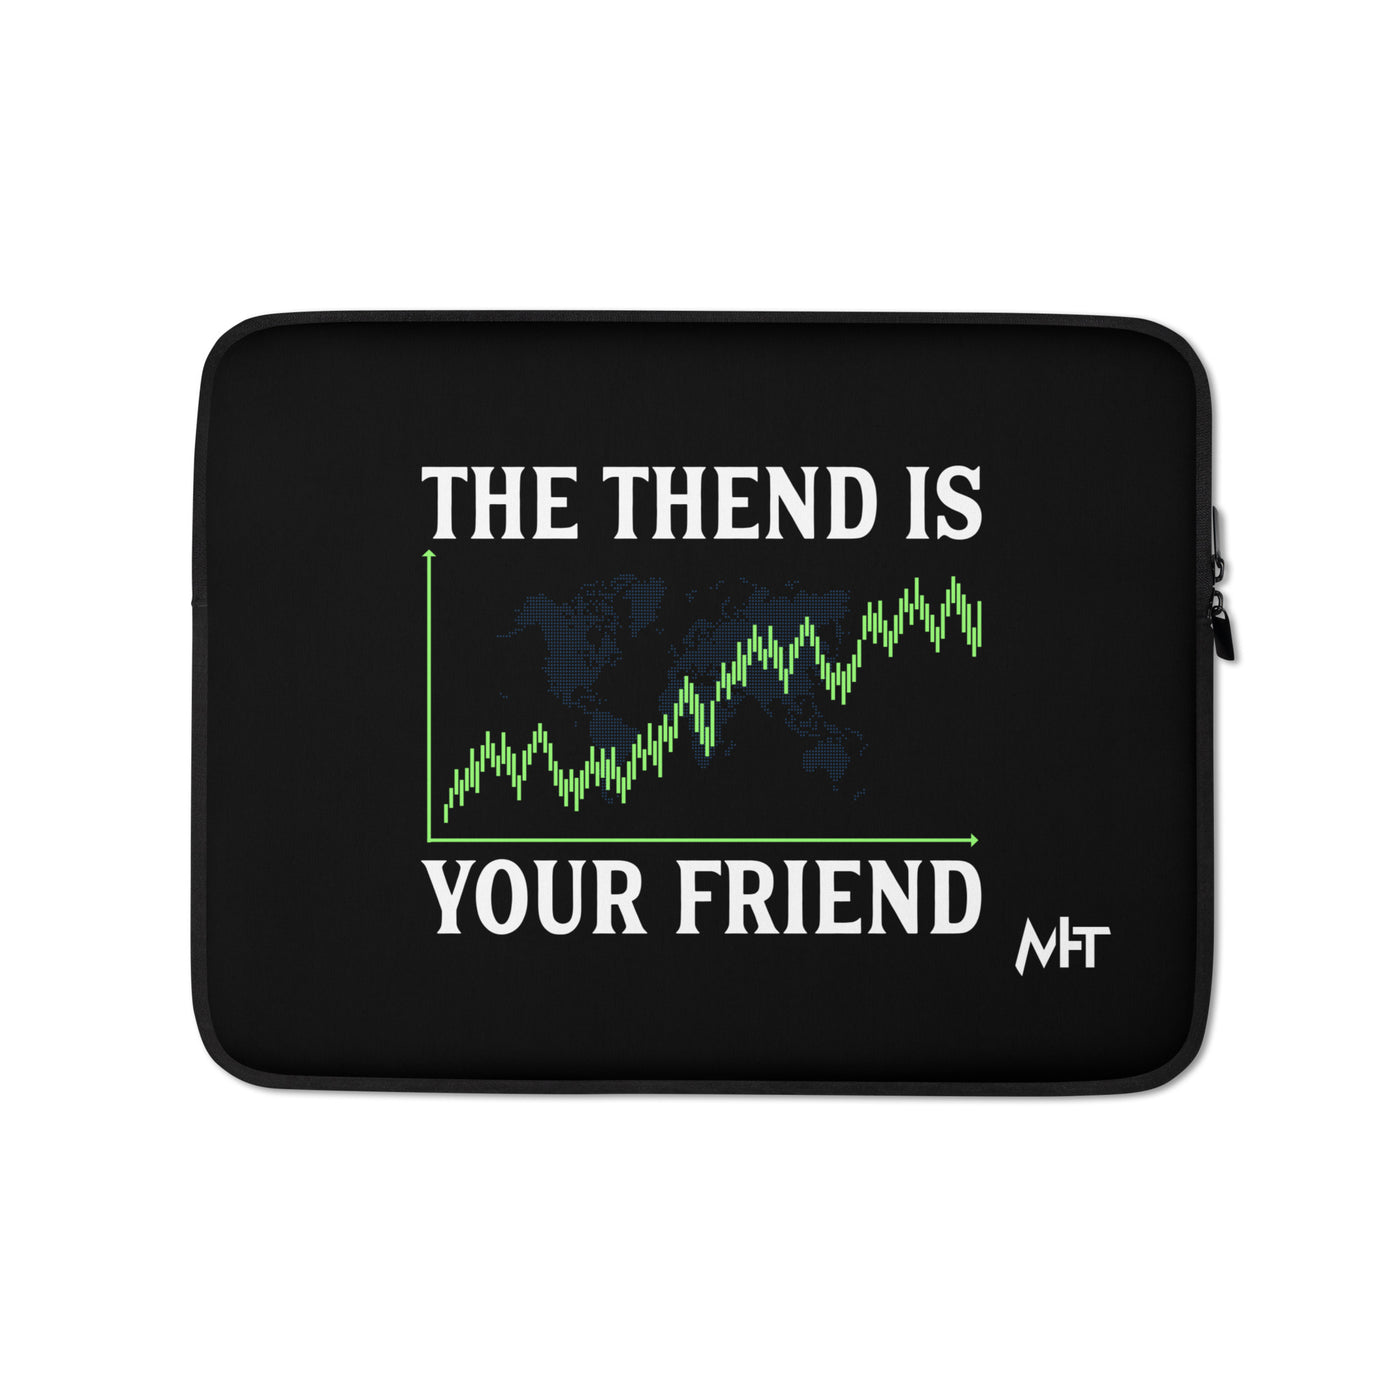 The Trend is your friend - Laptop Sleeve